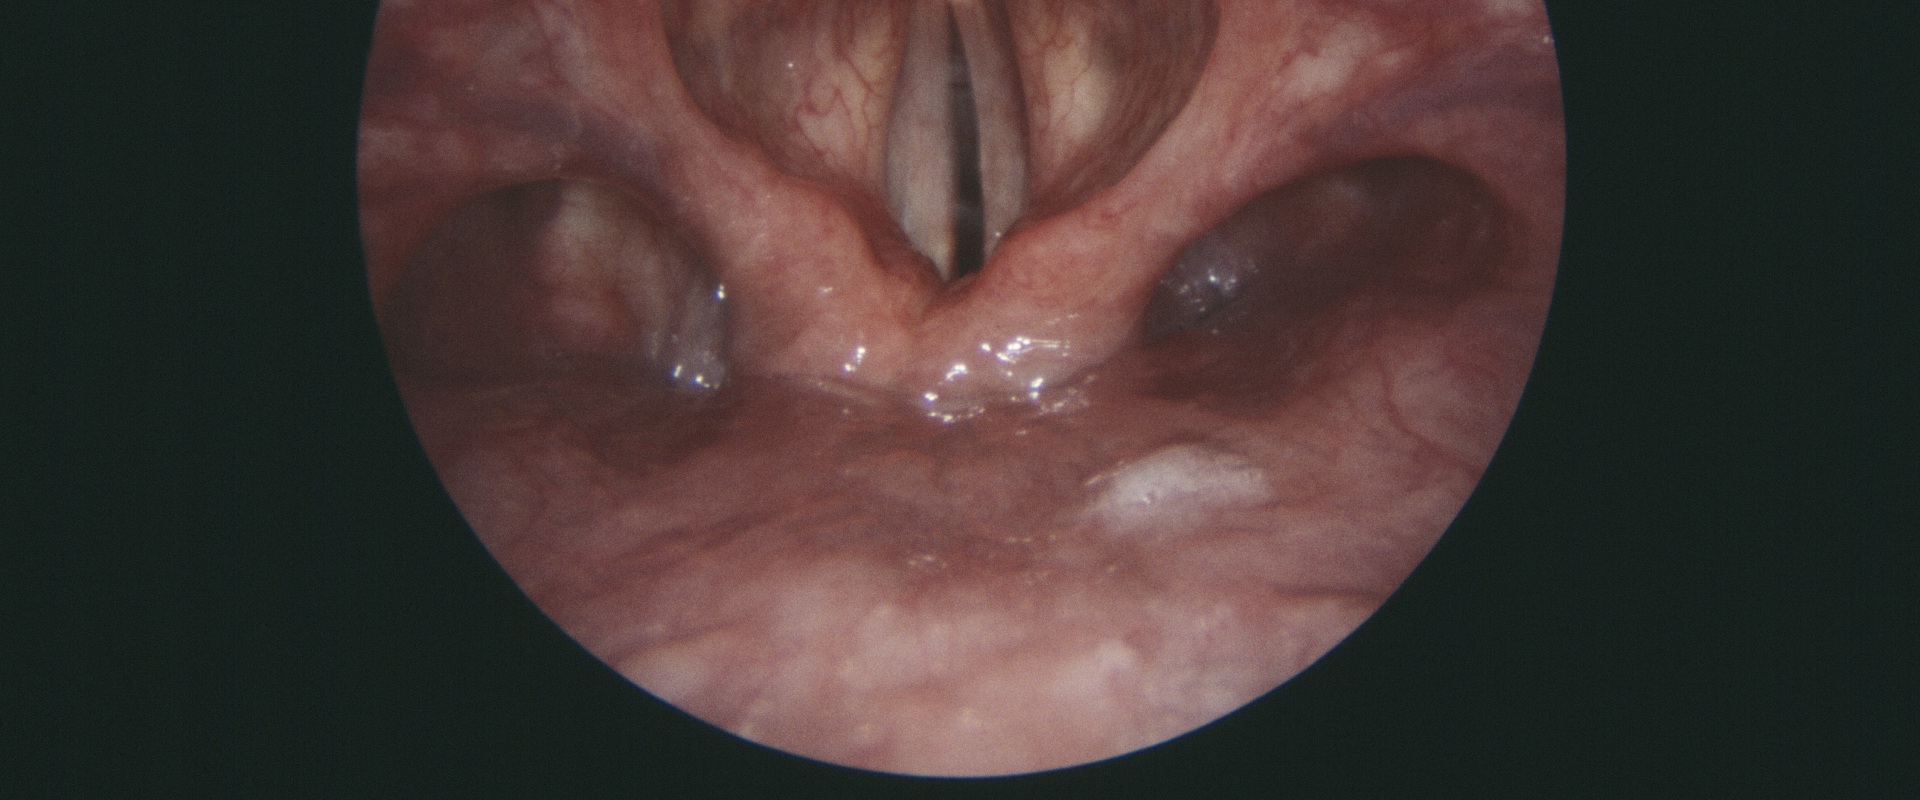 Why vocal cord paralysis?